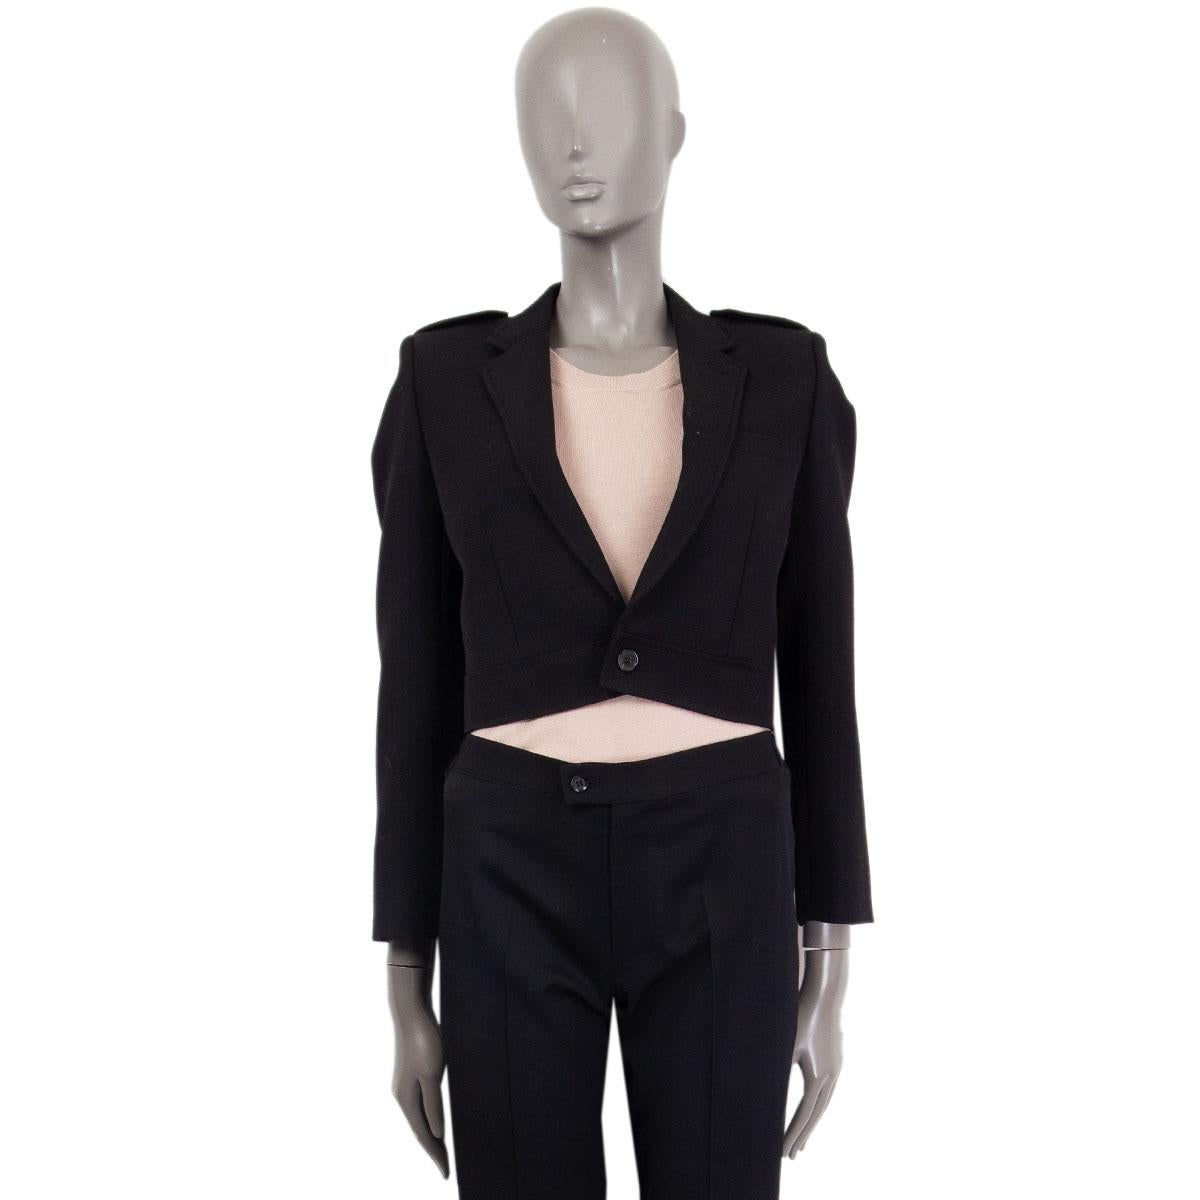 Saint Laurent cropped jacket in black wool (100%) with a notch collar, epaulettes, one front chest pocket and decorative buttoned cuffs. Closes on the front with a single button. Lined in black silk (100%). Has been worn and is in excellent